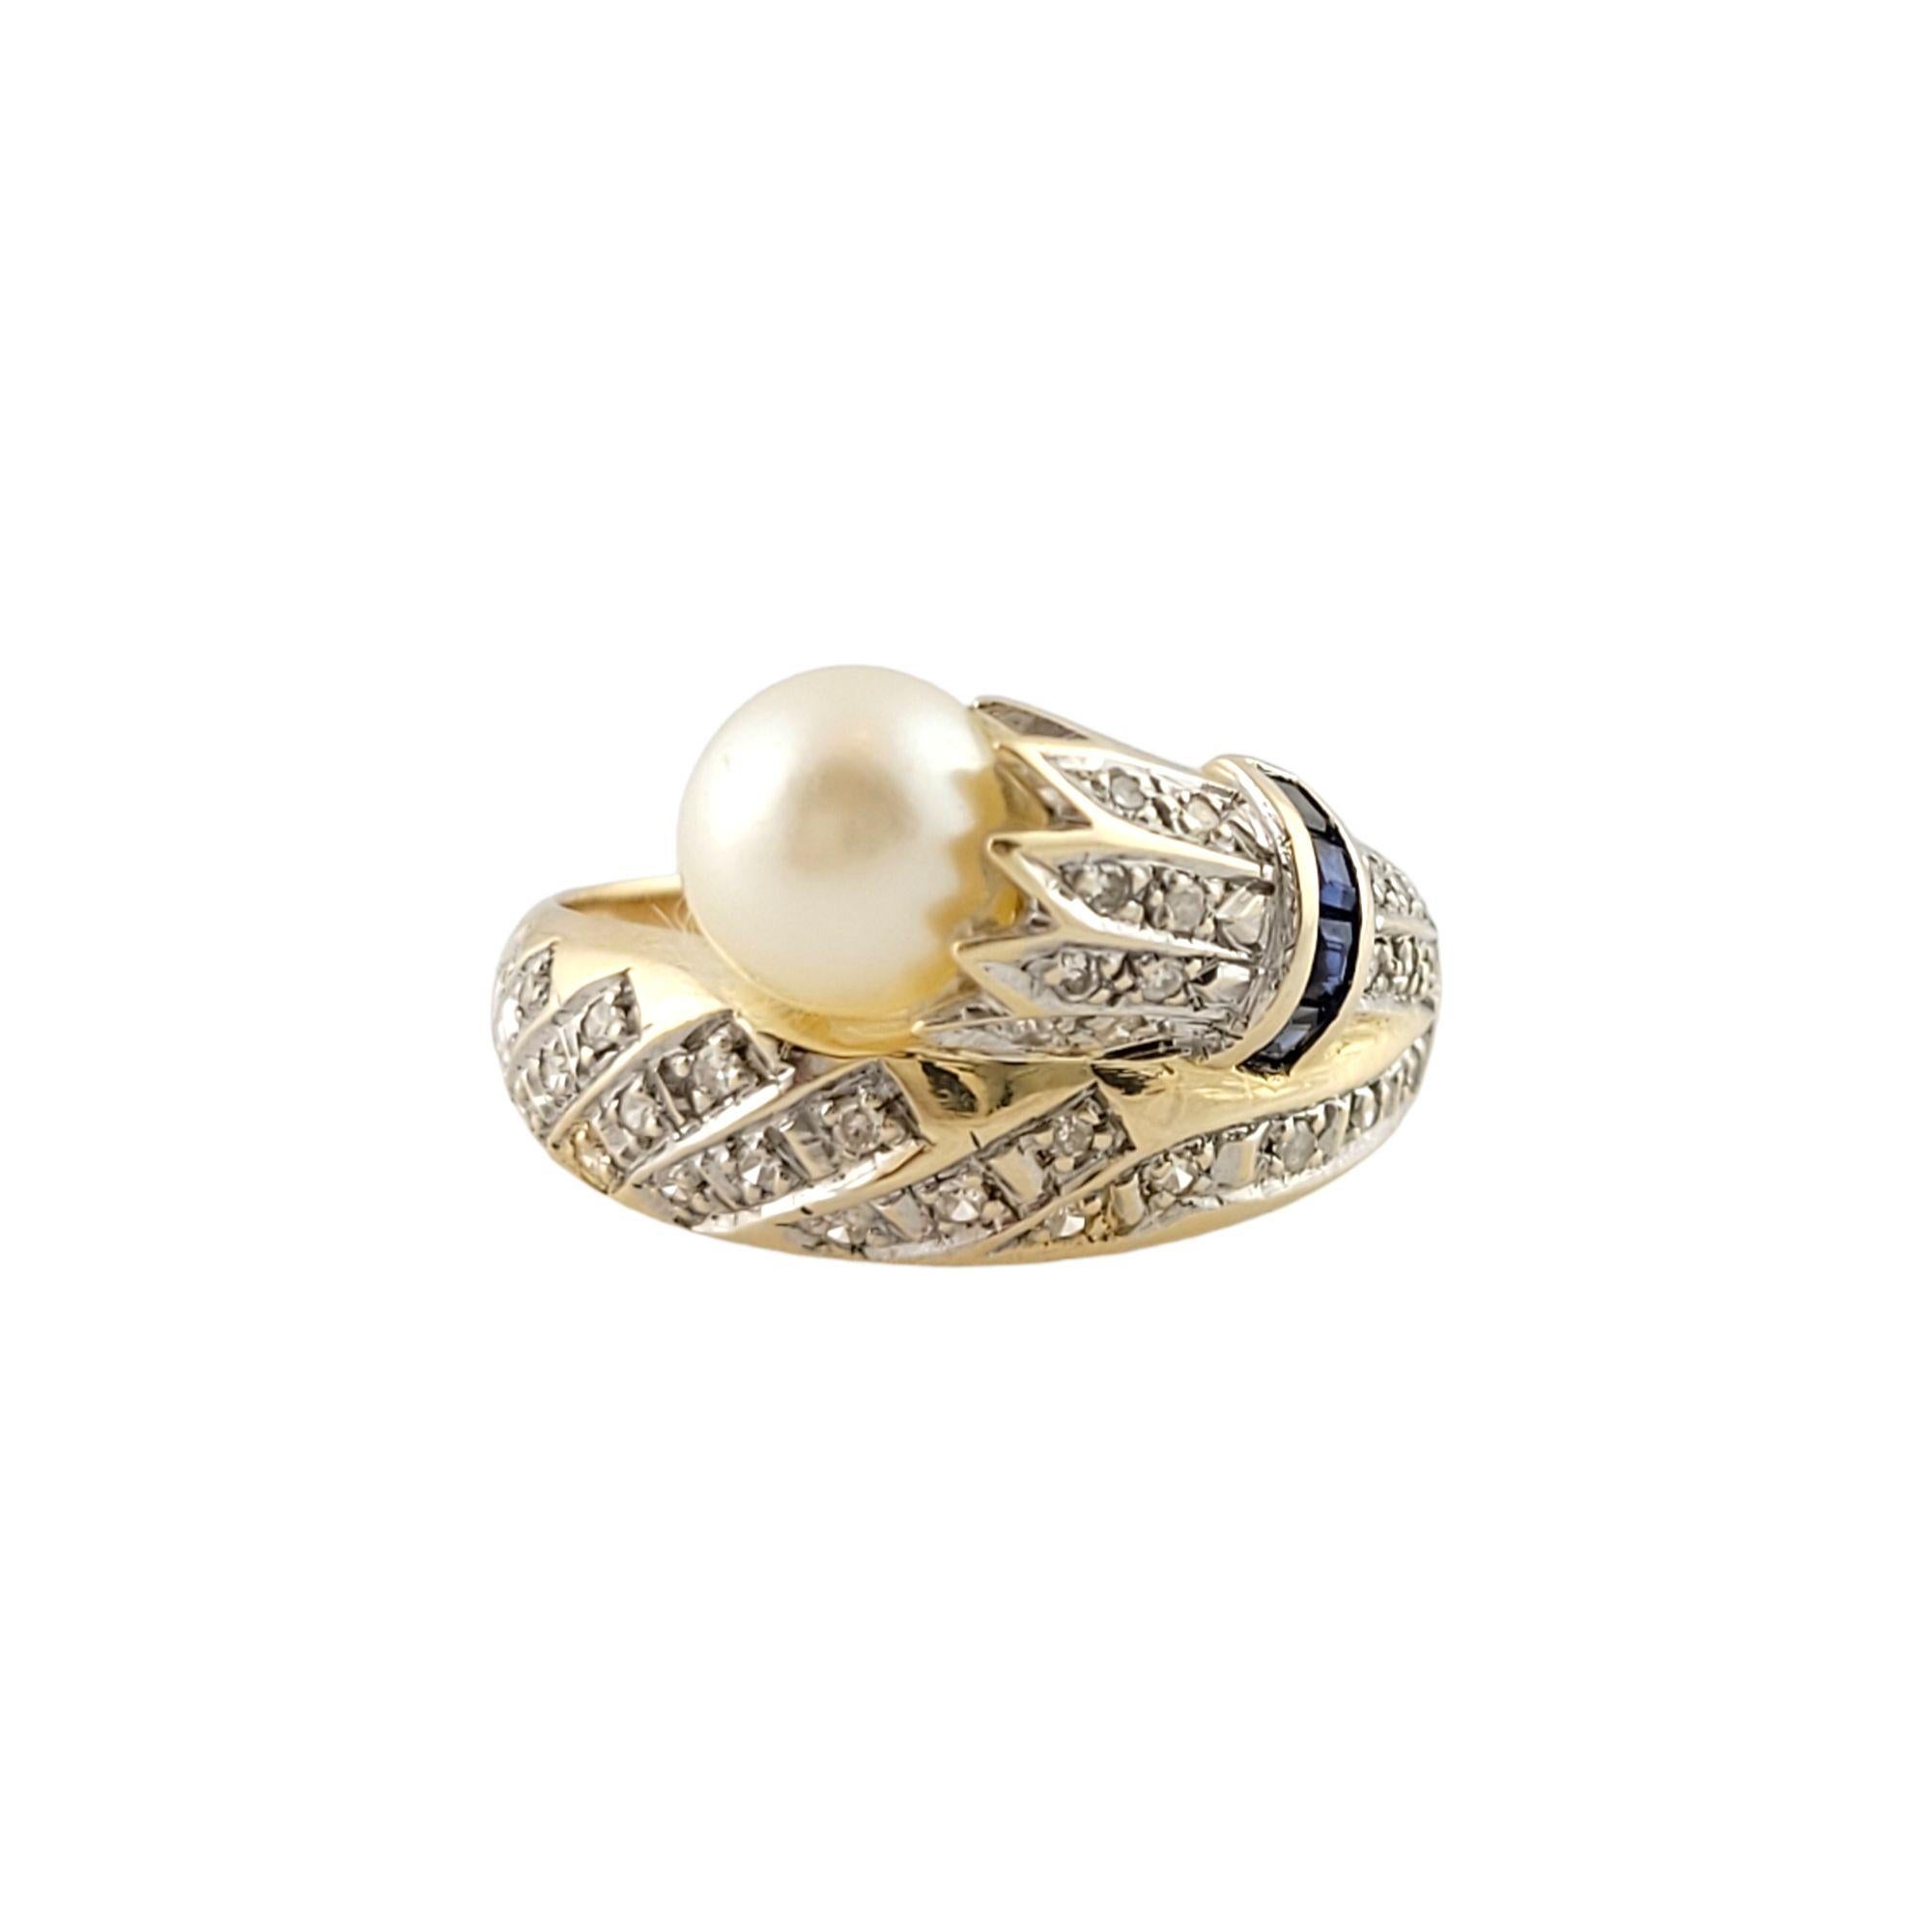 Round Cut 14k Yellow Gold Pearl Ring W/ Sapphires and Diamonds